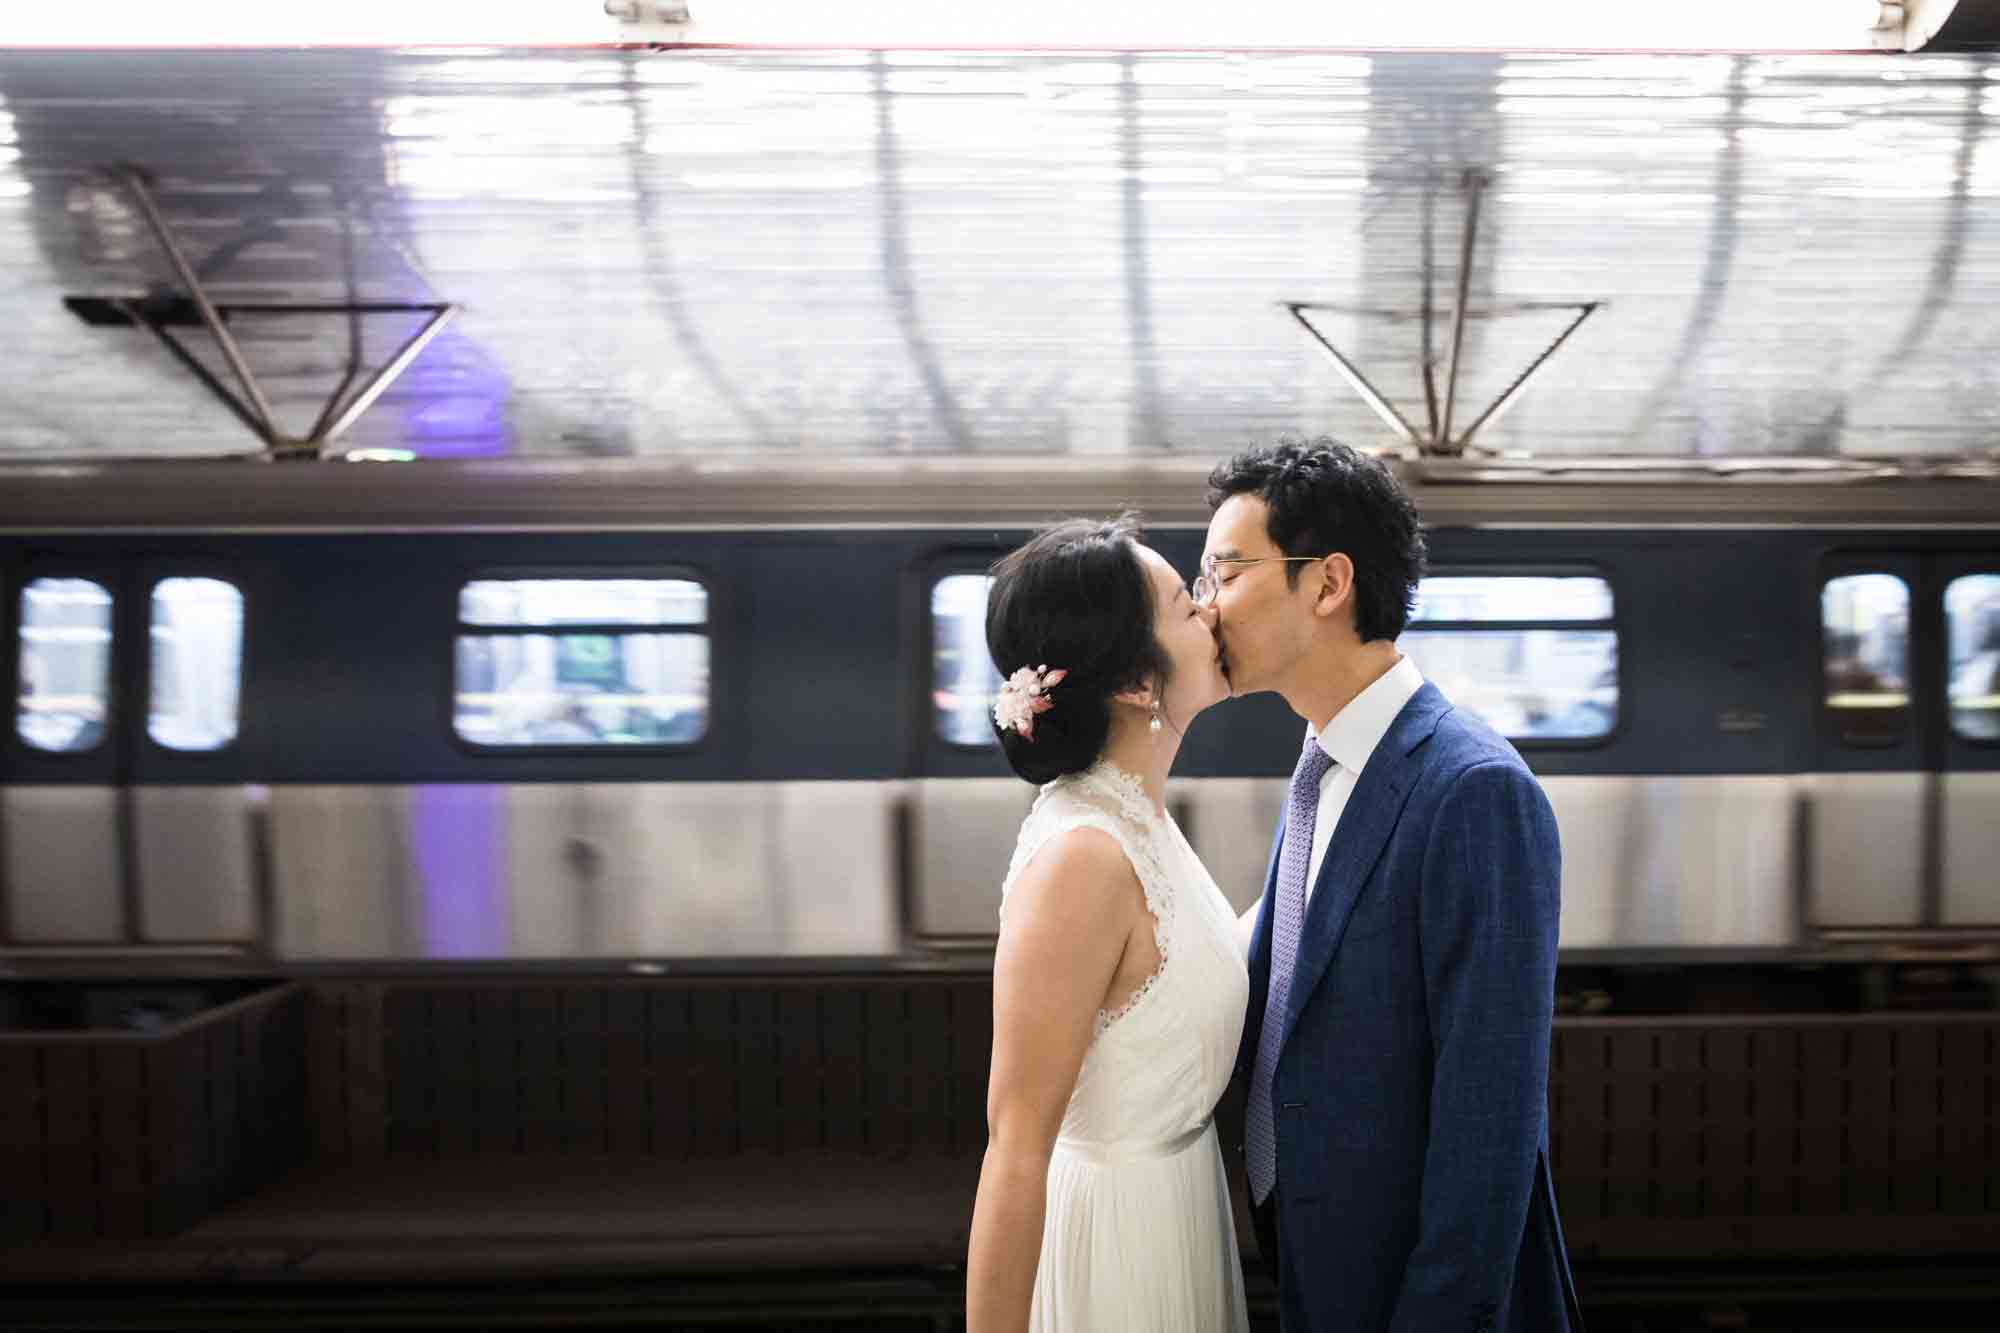 Couple kissing in subway station in front of moving train during a Roosevelt Island engagement photo shoot